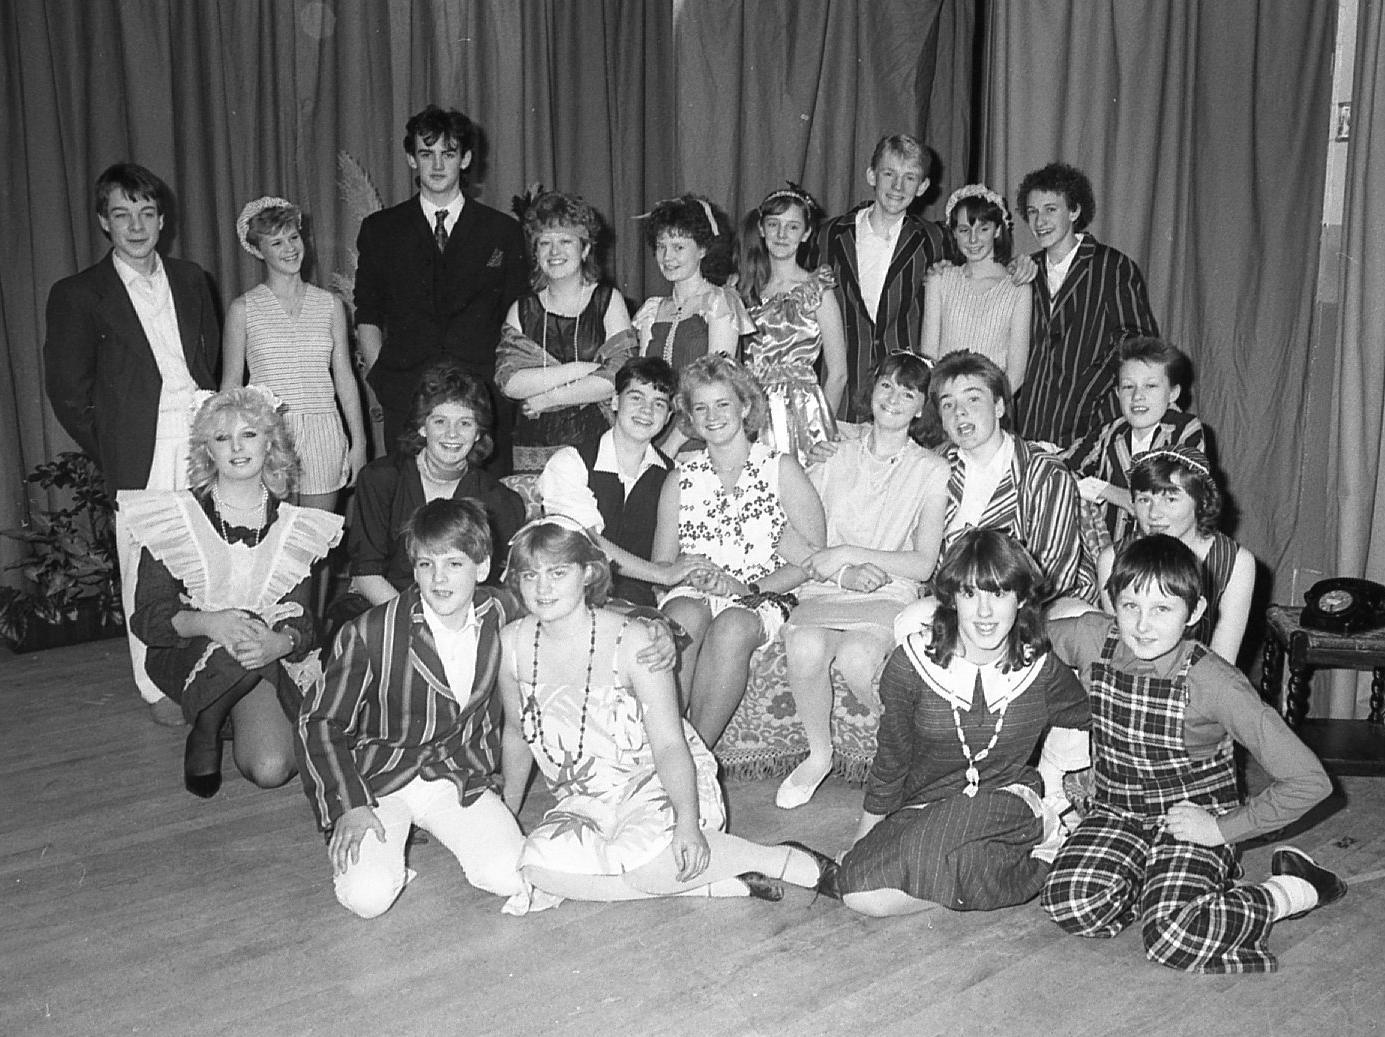 The period piece The Boyfriend, set in the 1920s, was staged at Carr Hill High school in Kirkham, produced by Sheila Warrick and directed by Tony Halenshaw. The cast of Carr Hill High School's production of Sandy Wilson's play are pictured above